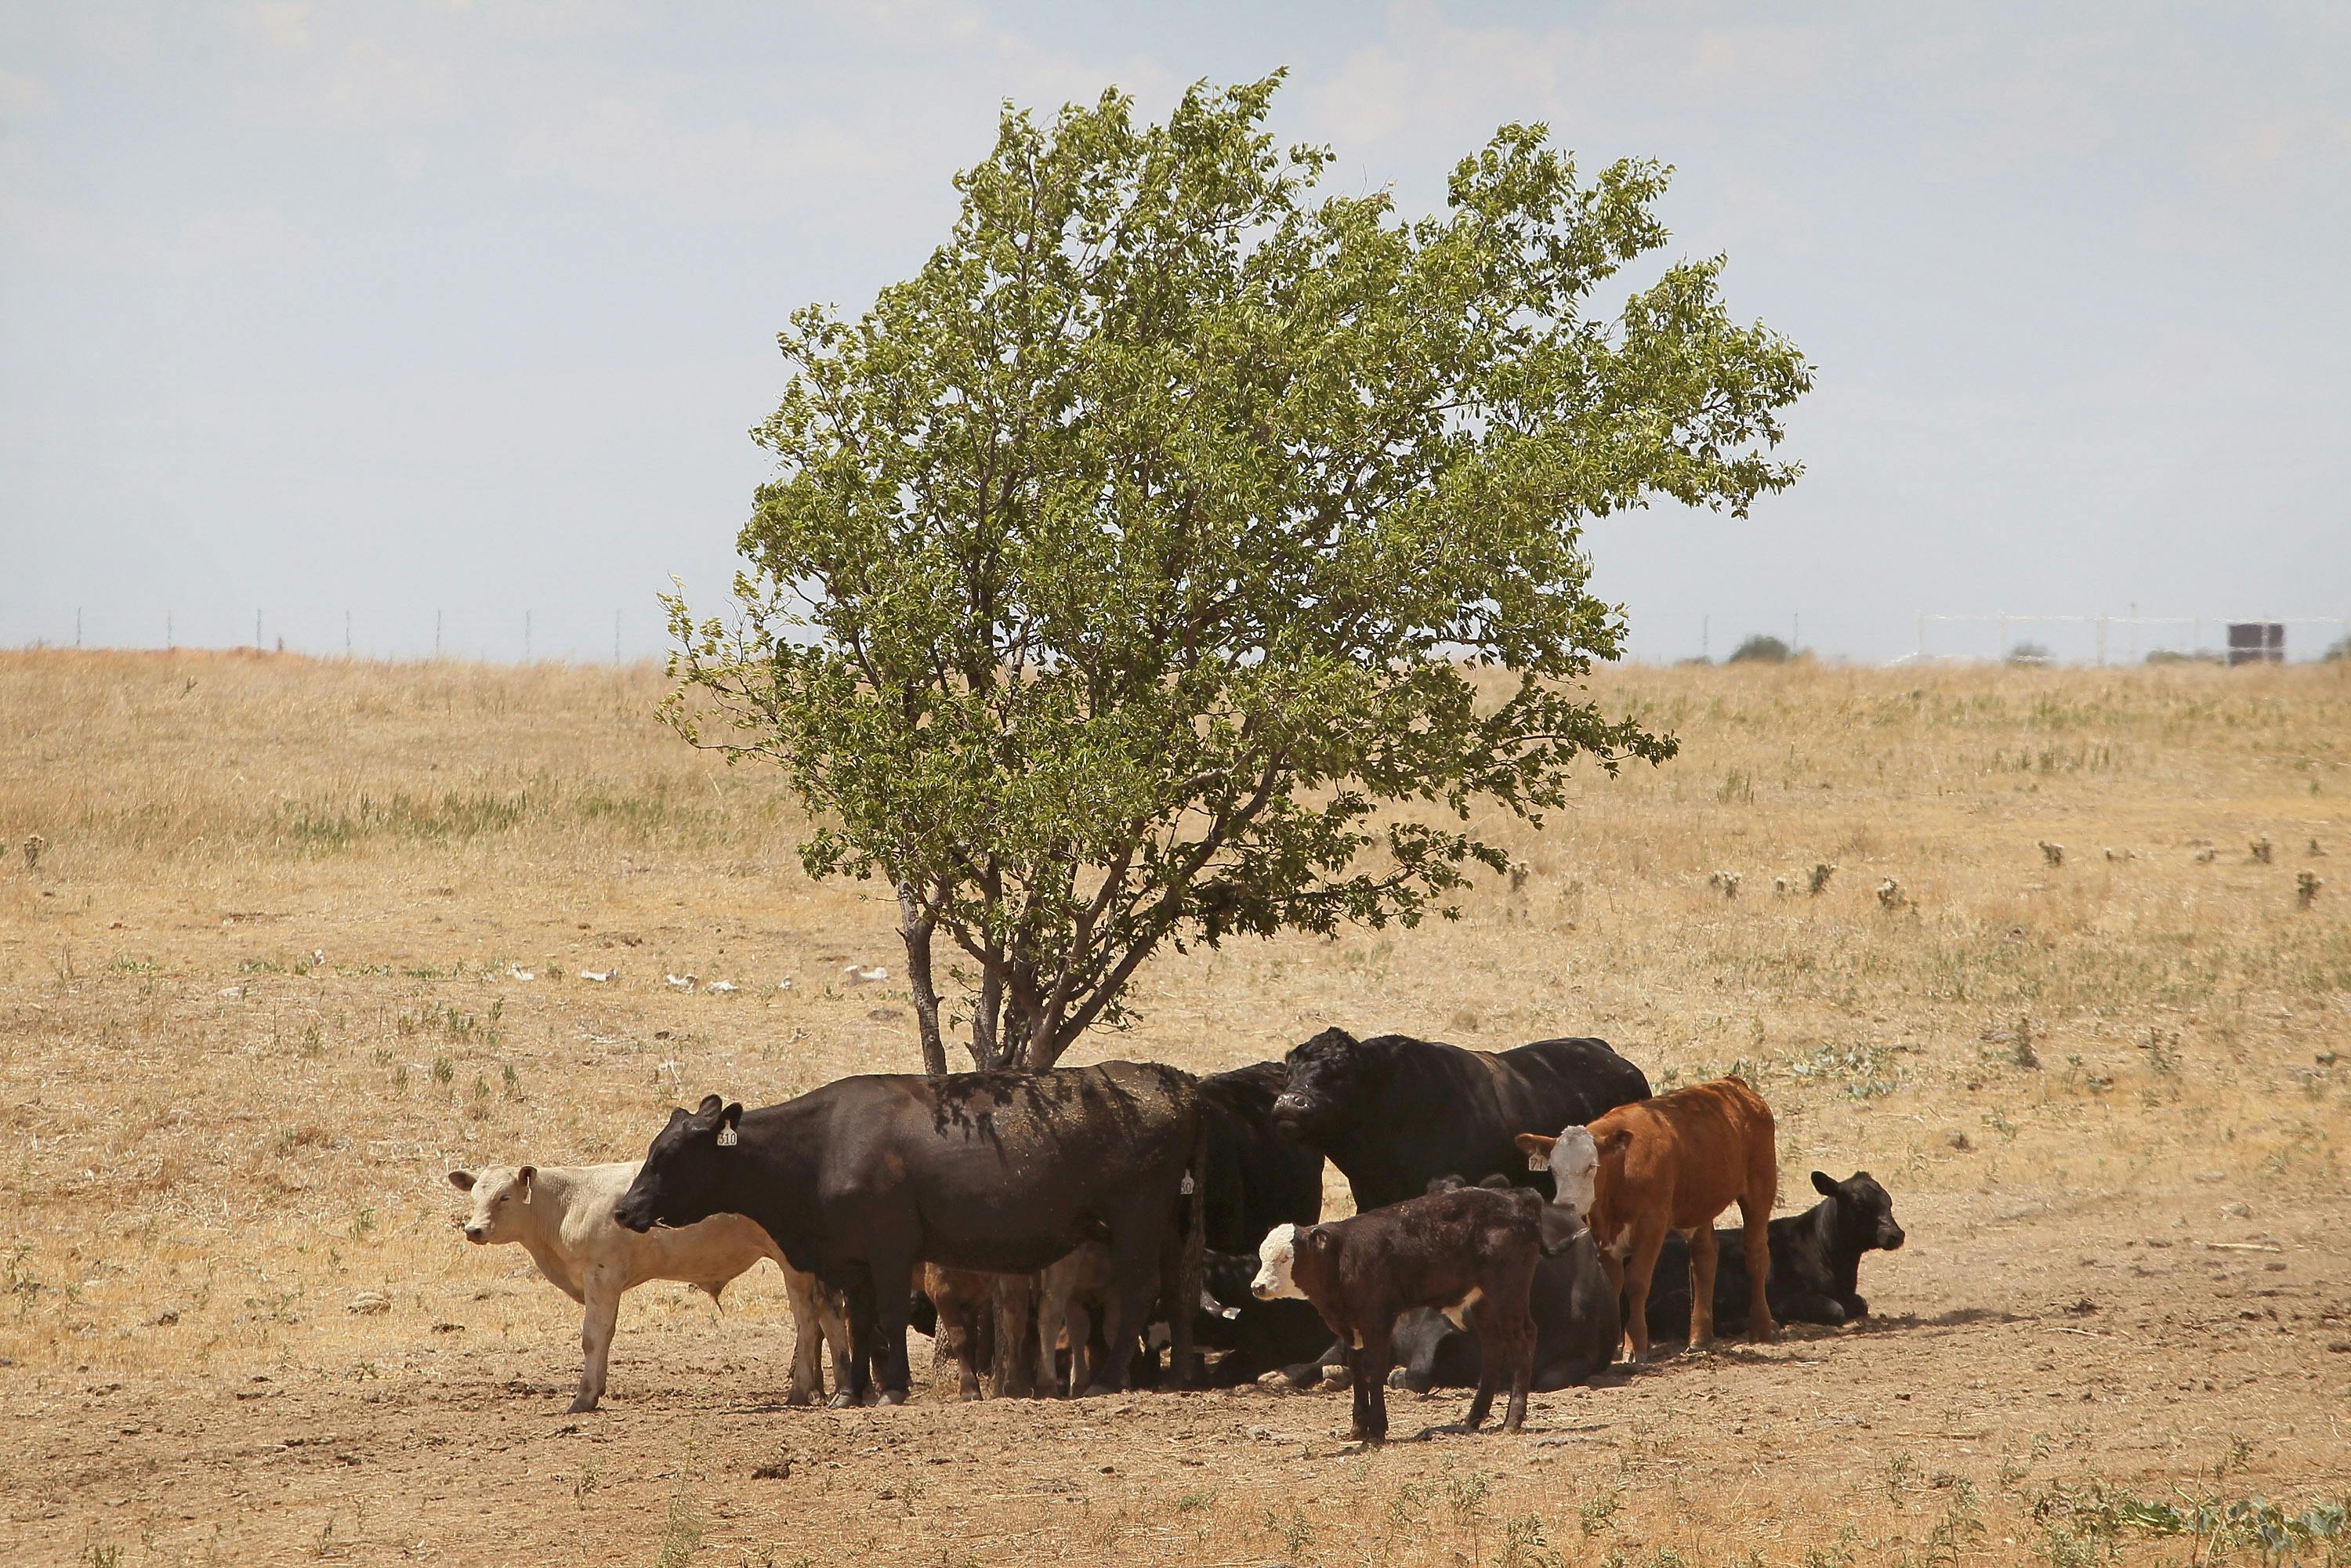 CANADIAN, TX - JULY 28: Cattle use a tree for shade as temperatures rose above 100 degrees in a pasture July 28, 2011 near Canadian, Texas. A severe drought has caused shortages of grass, hay and water, in much of the state, forcing ranchers to thin their herds or risk losing their cattle to the drought. The past nine months have been the driest in Texas since record keeping began in 1895, with 75% of the state classified as exceptional drought, the worst level. (Photo by Scott Olson/Getty Images)